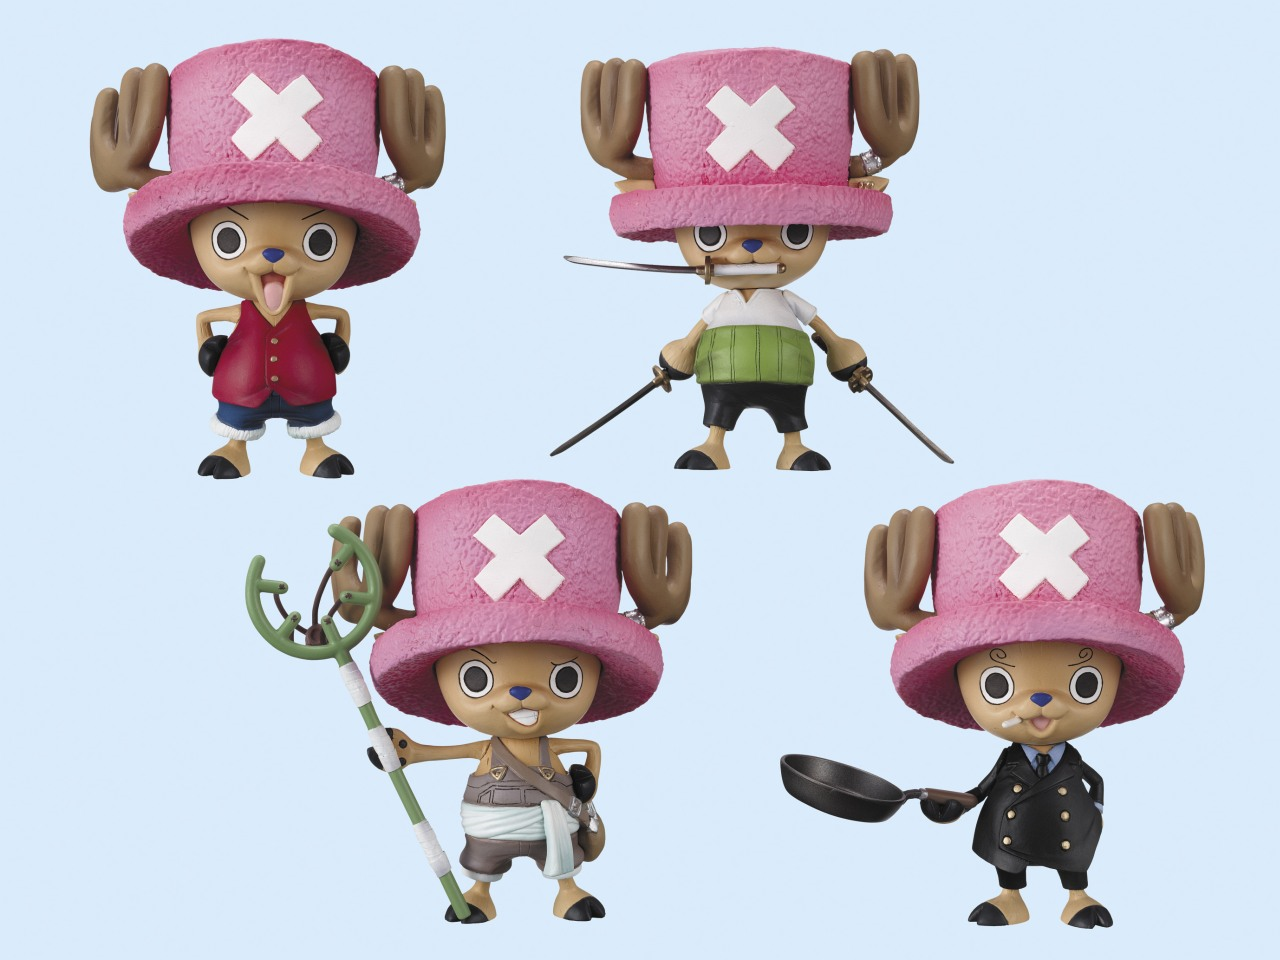 https://static.wikia.nocookie.net/onepiece/images/6/6b/Chopper_Model_Pirate.png/revision/latest/scale-to-width-down/1280?cb=20150828221905